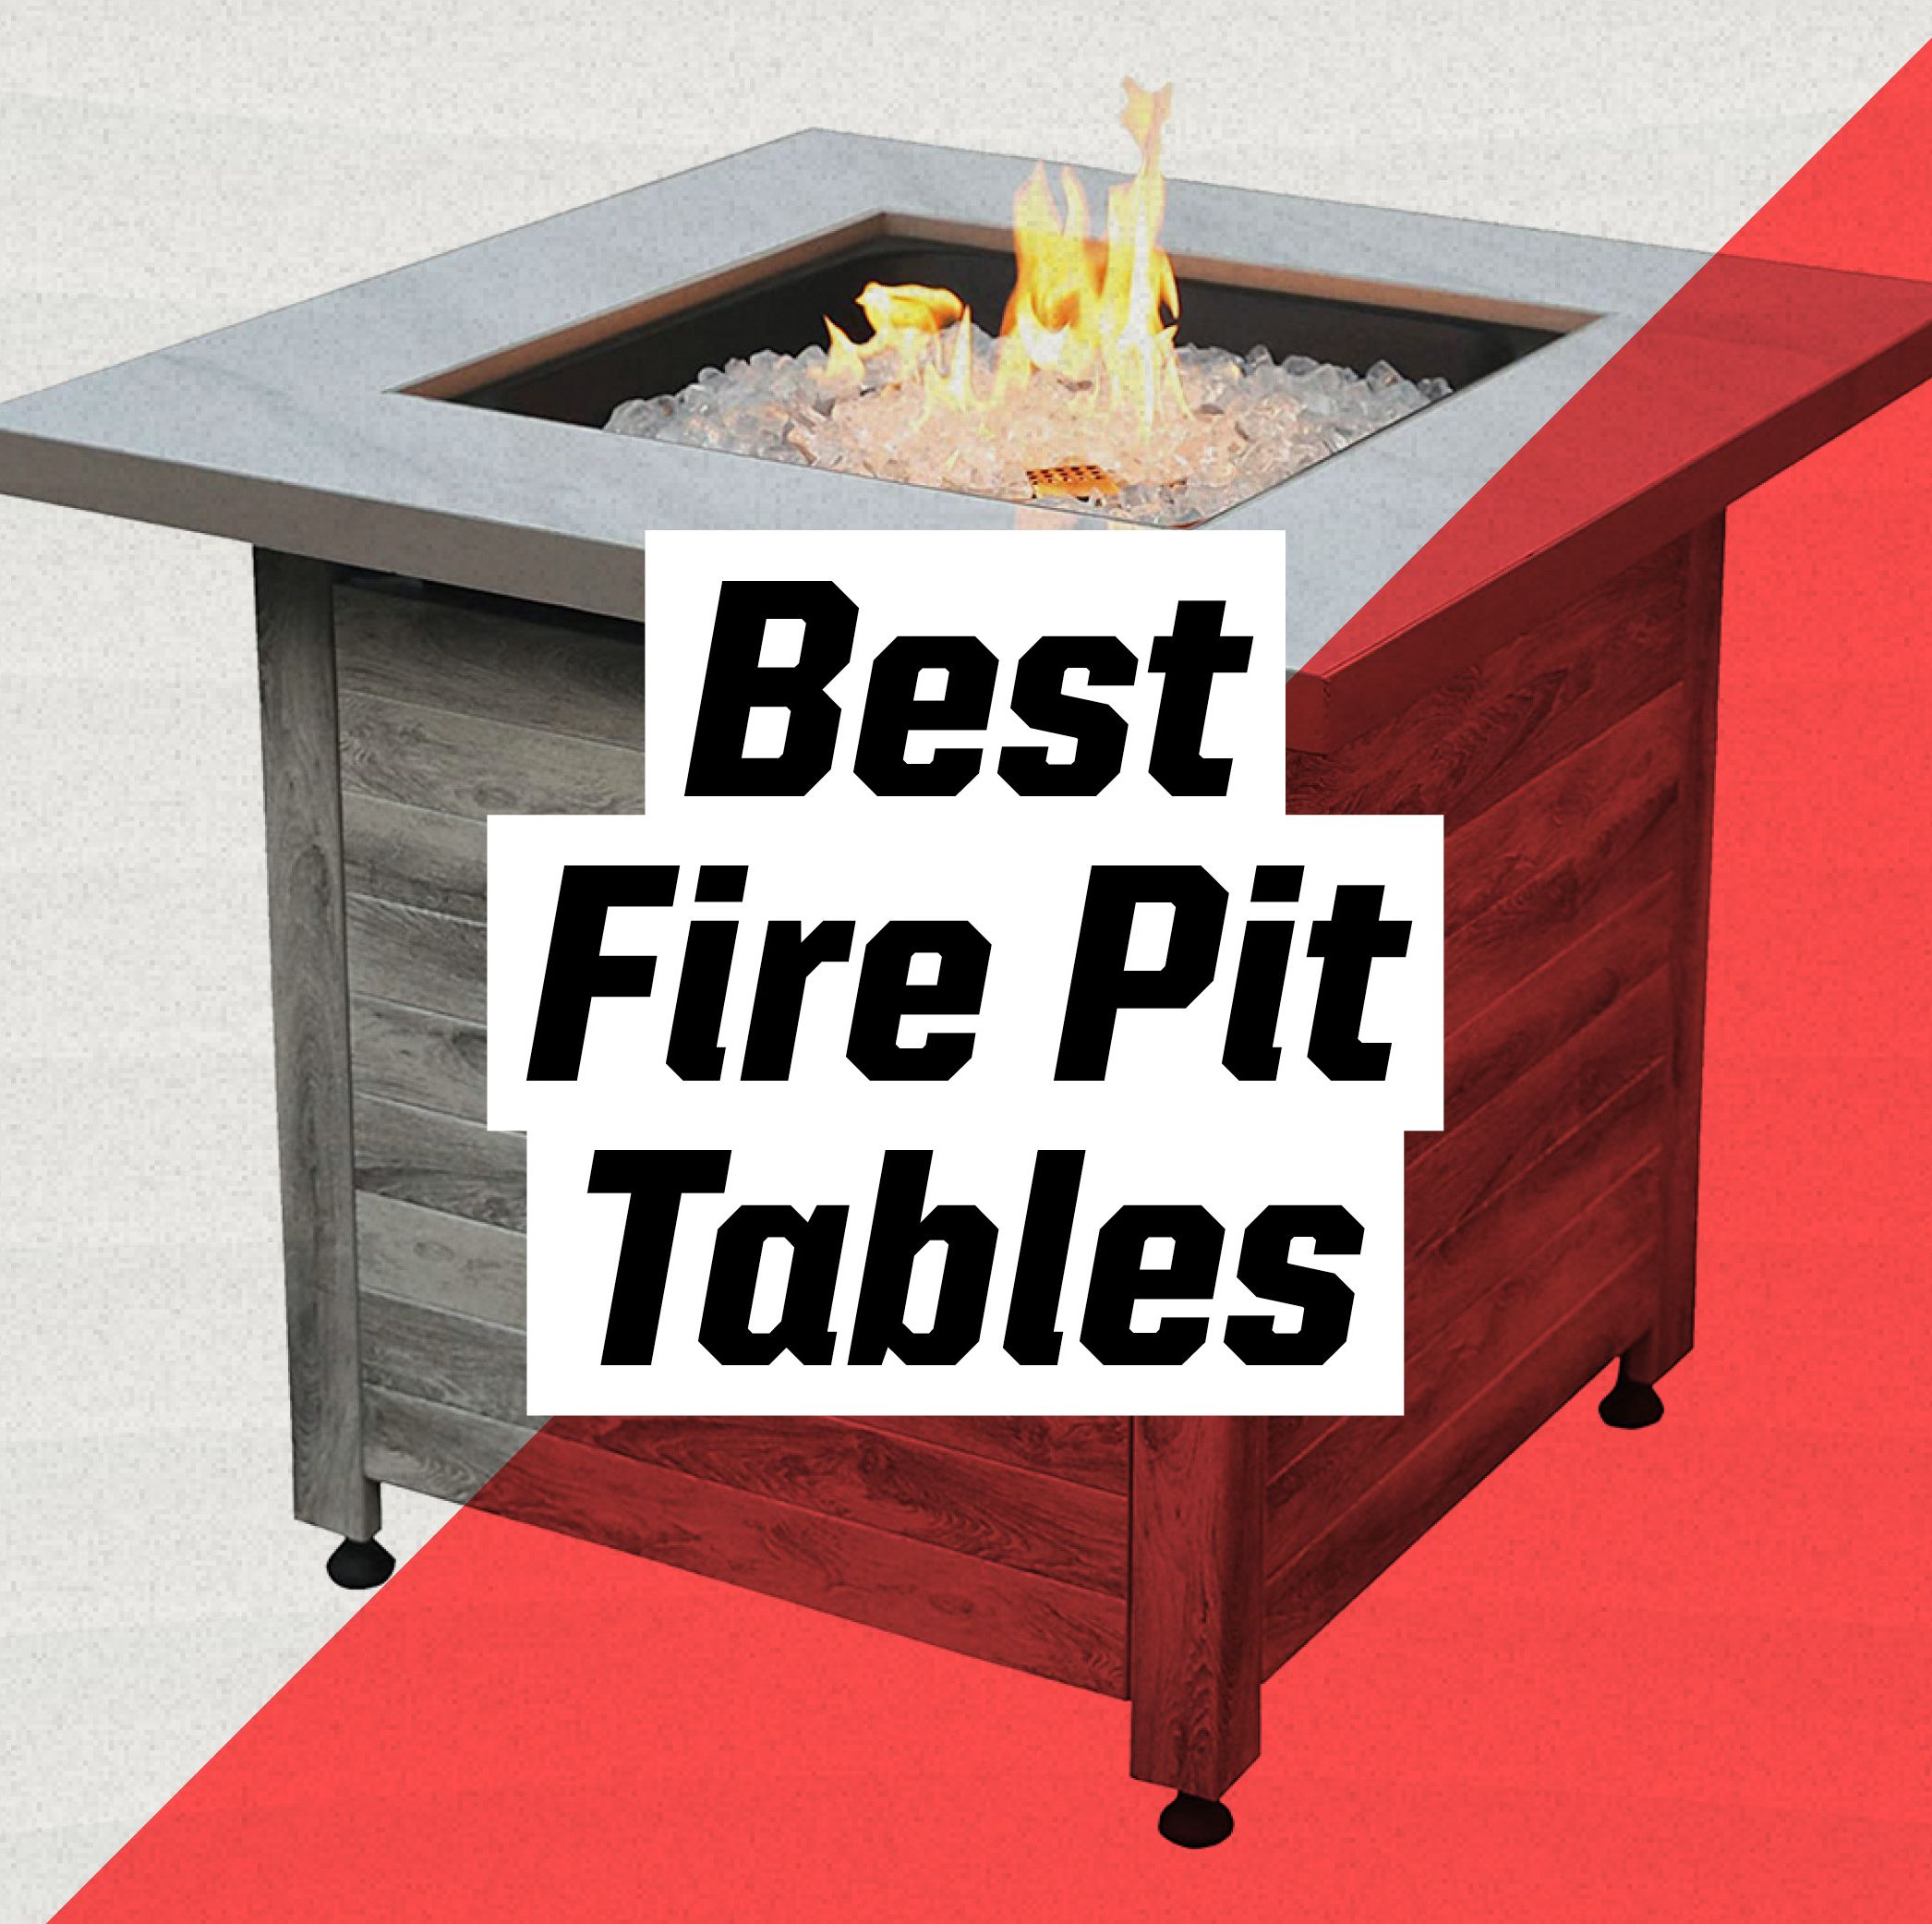 Upgrade Your Outdoor Space With a Practical and Stylish Fire Pit Table